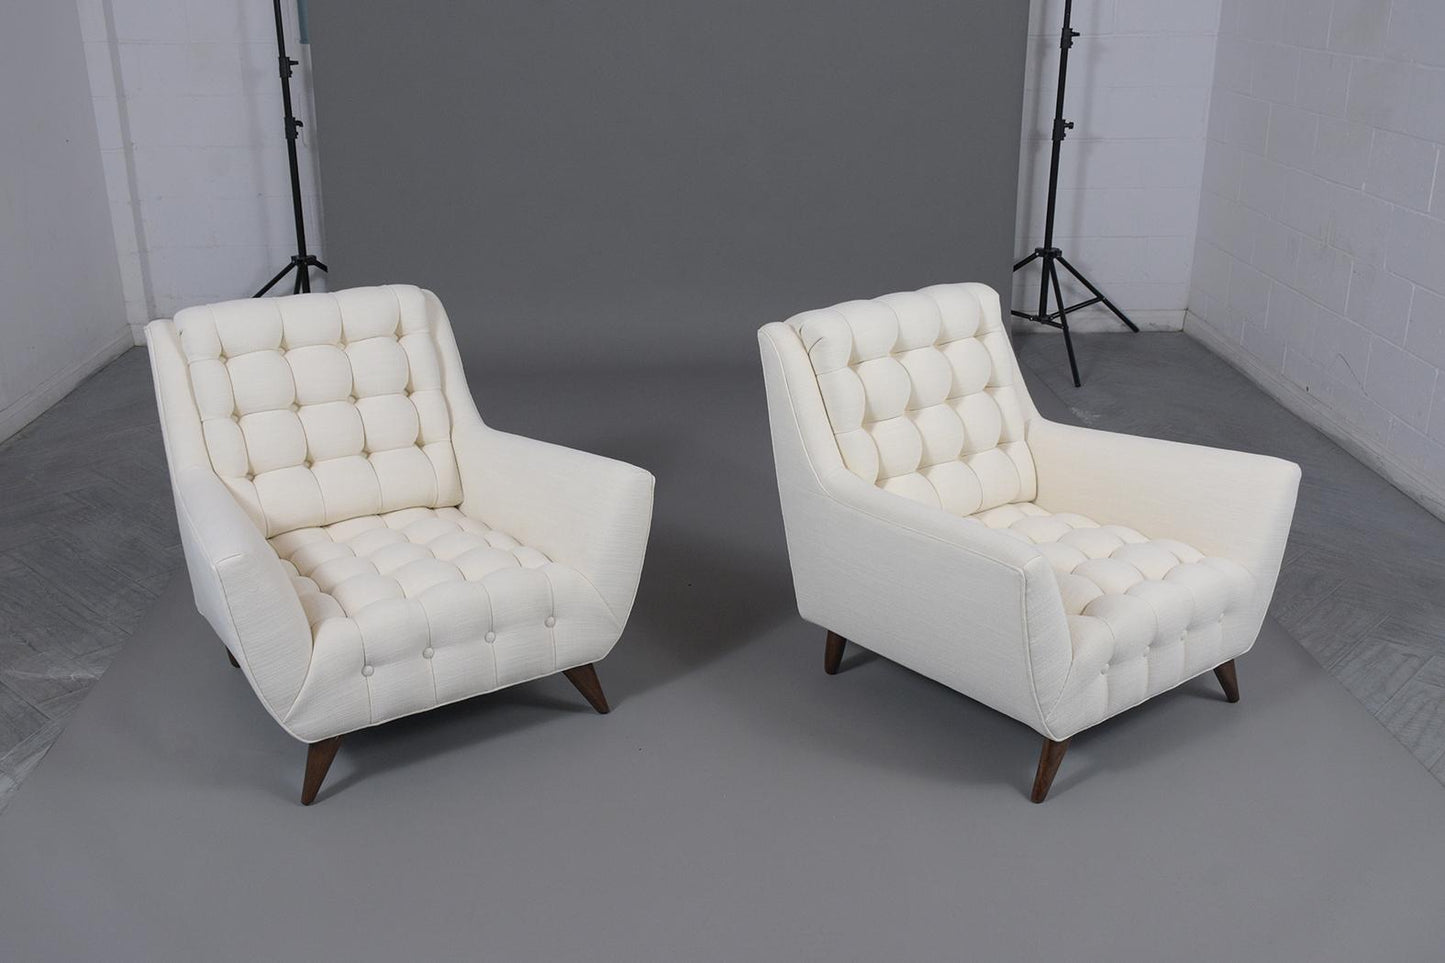 Restored Adrian Pearsall-Style Mid-Century Modern Lounge Chairs in Oyster Fabric